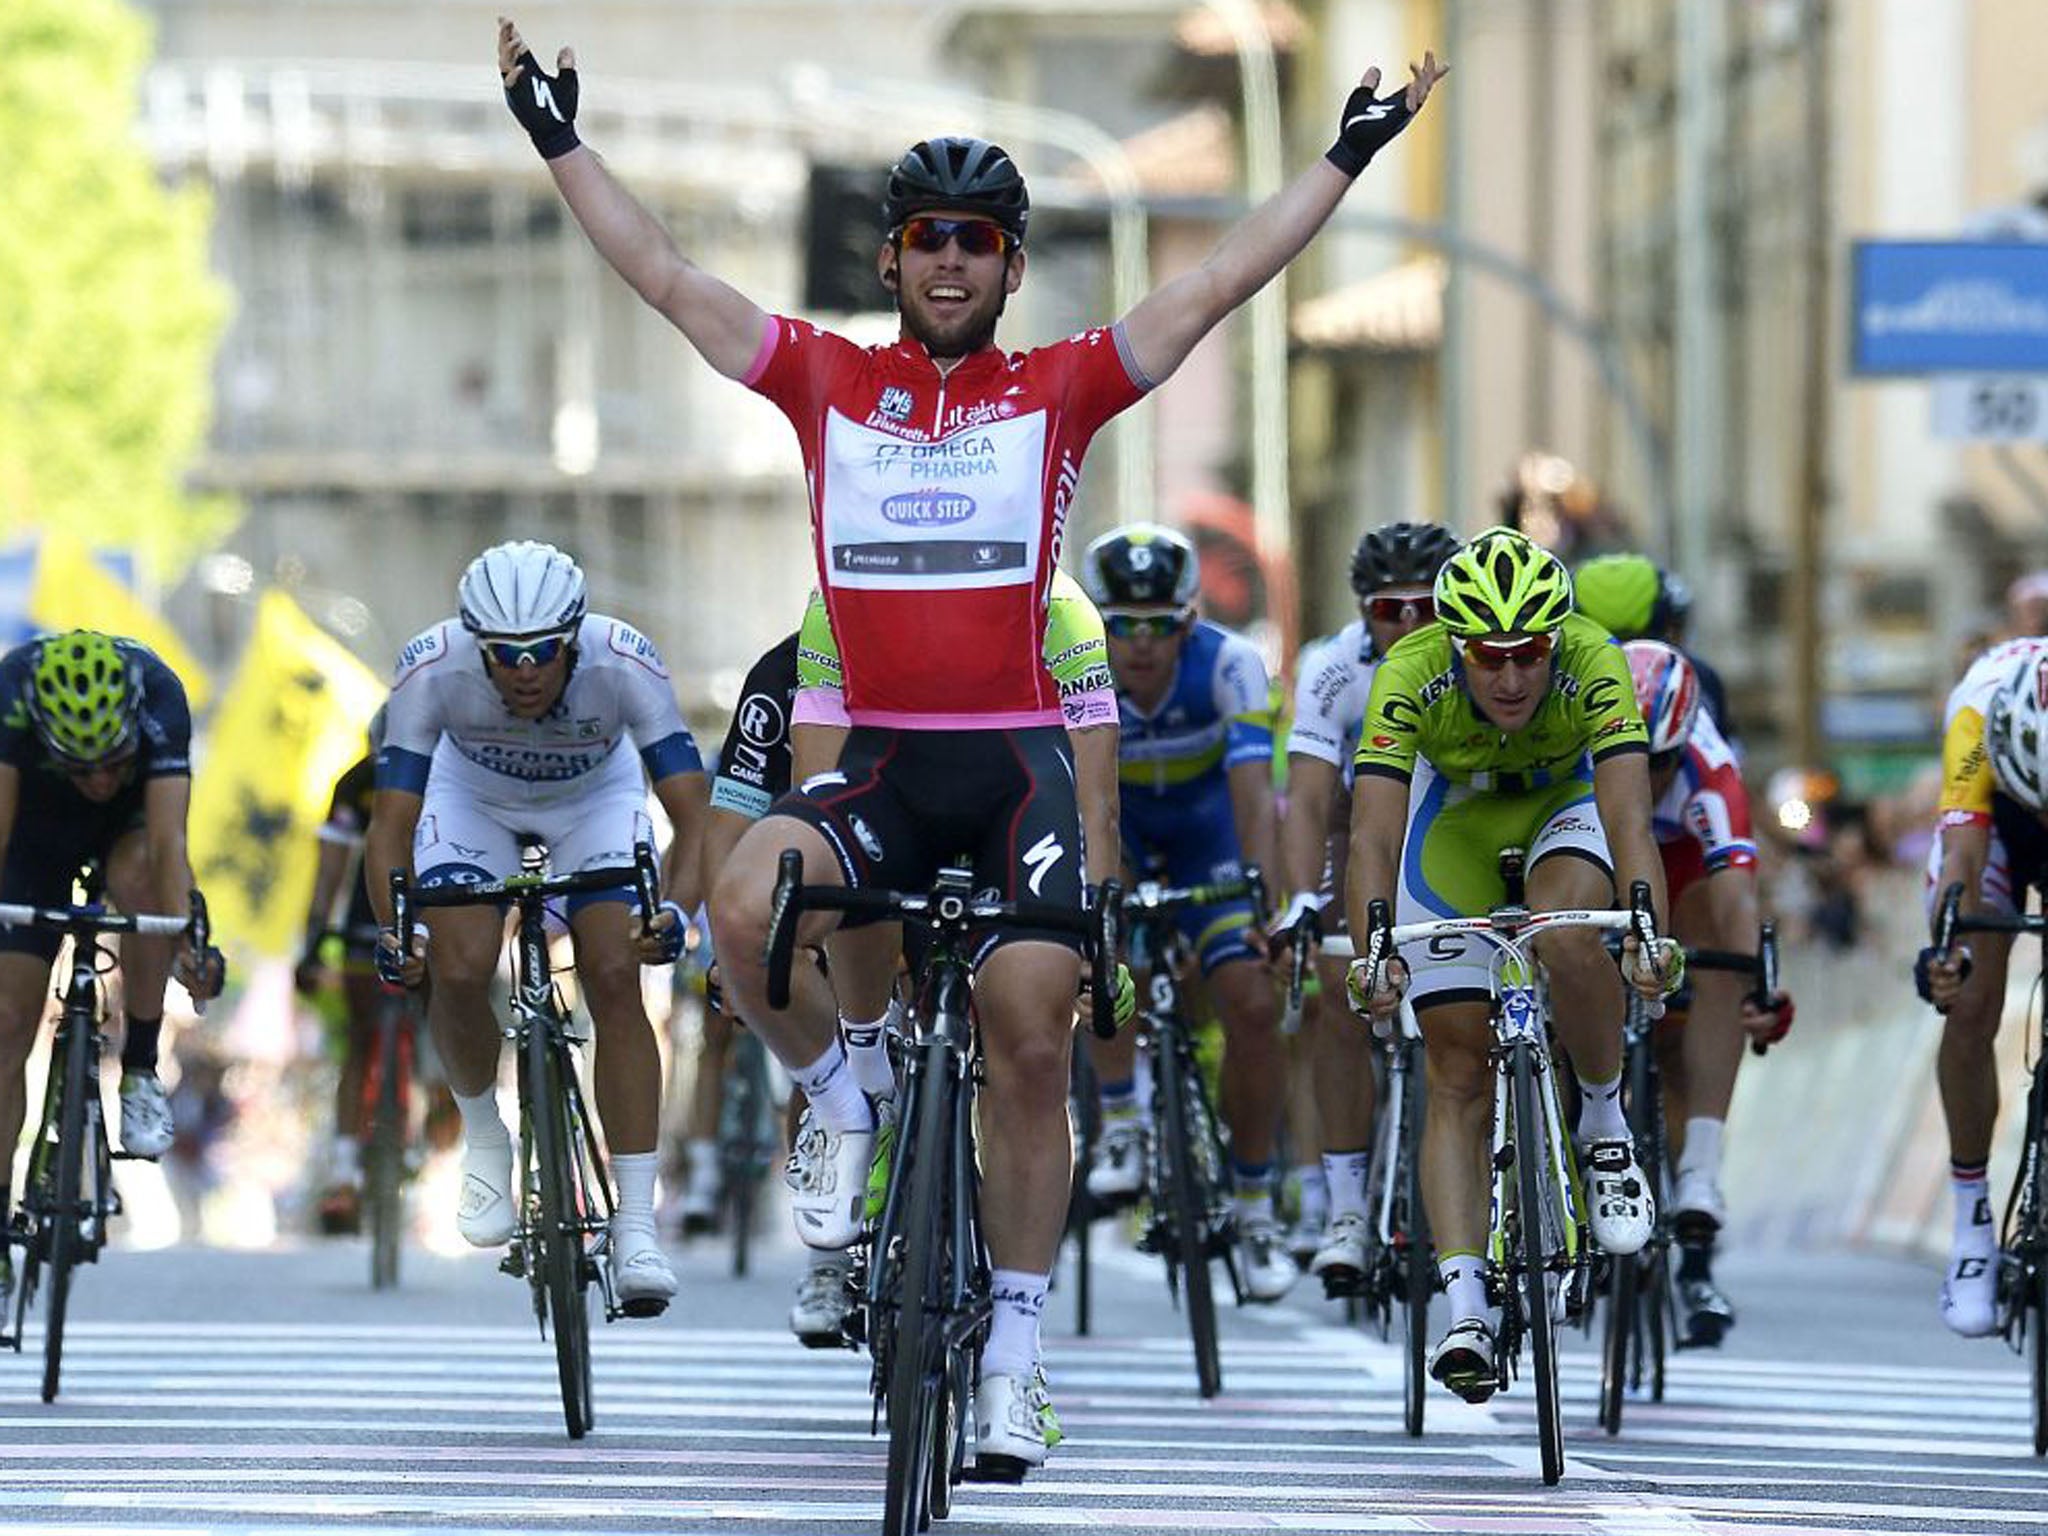 Cavendish celebrates as he crosses the finish line to win the final stage of the Giro d'Italia